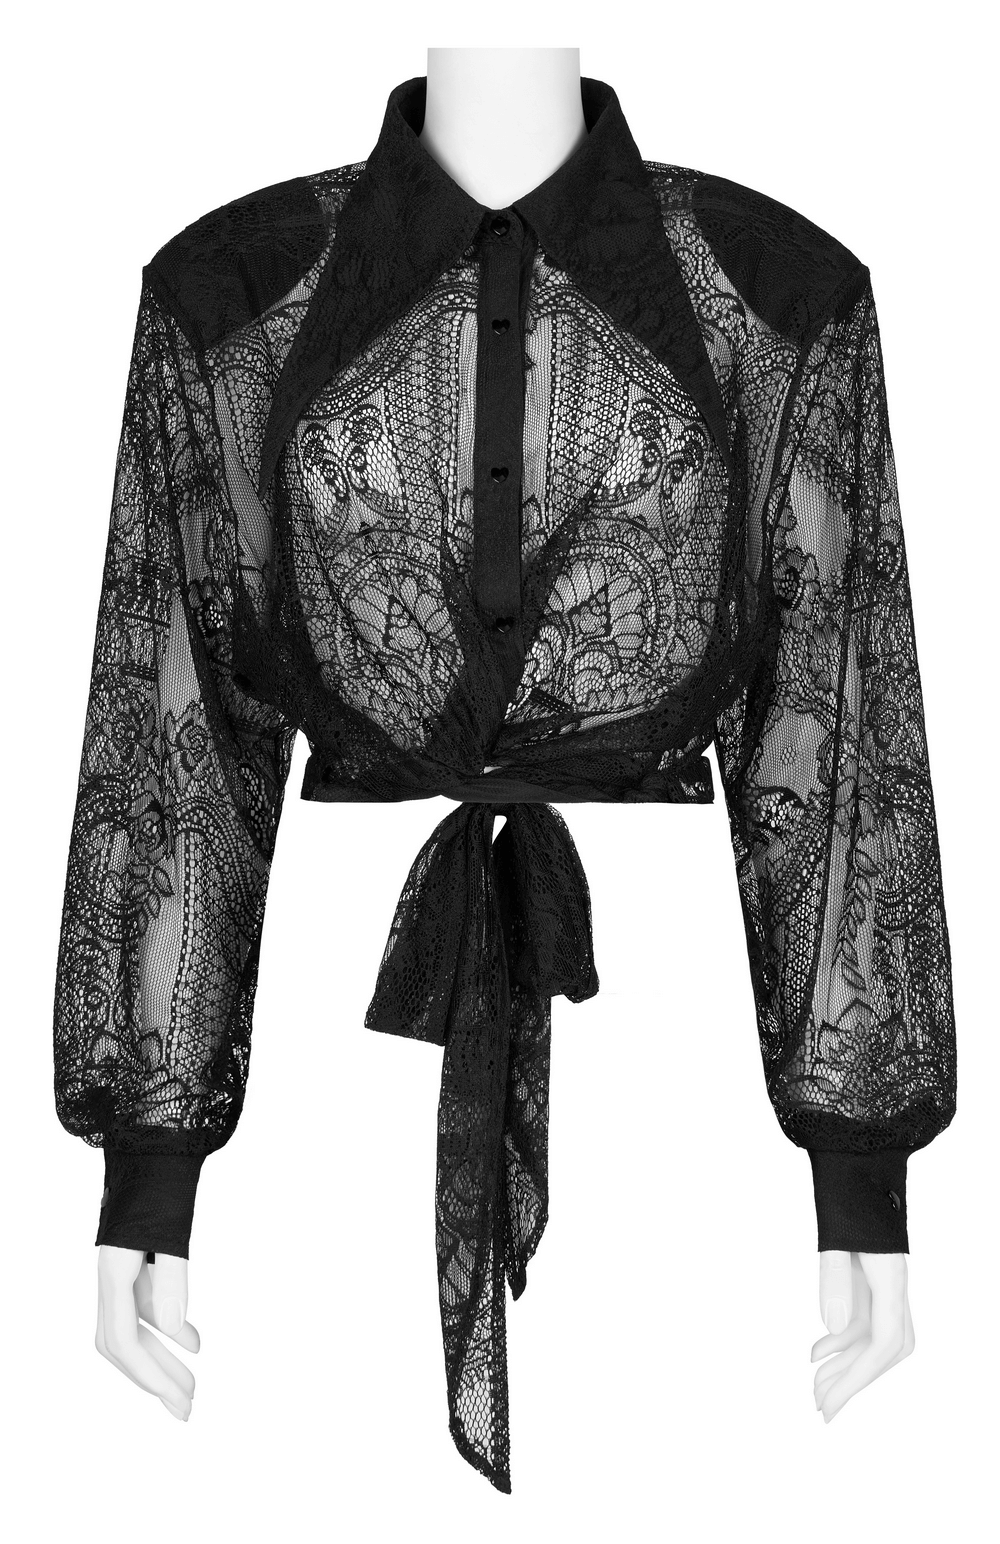 Elegant Gothic Black Lace Crop Shirt with Ties